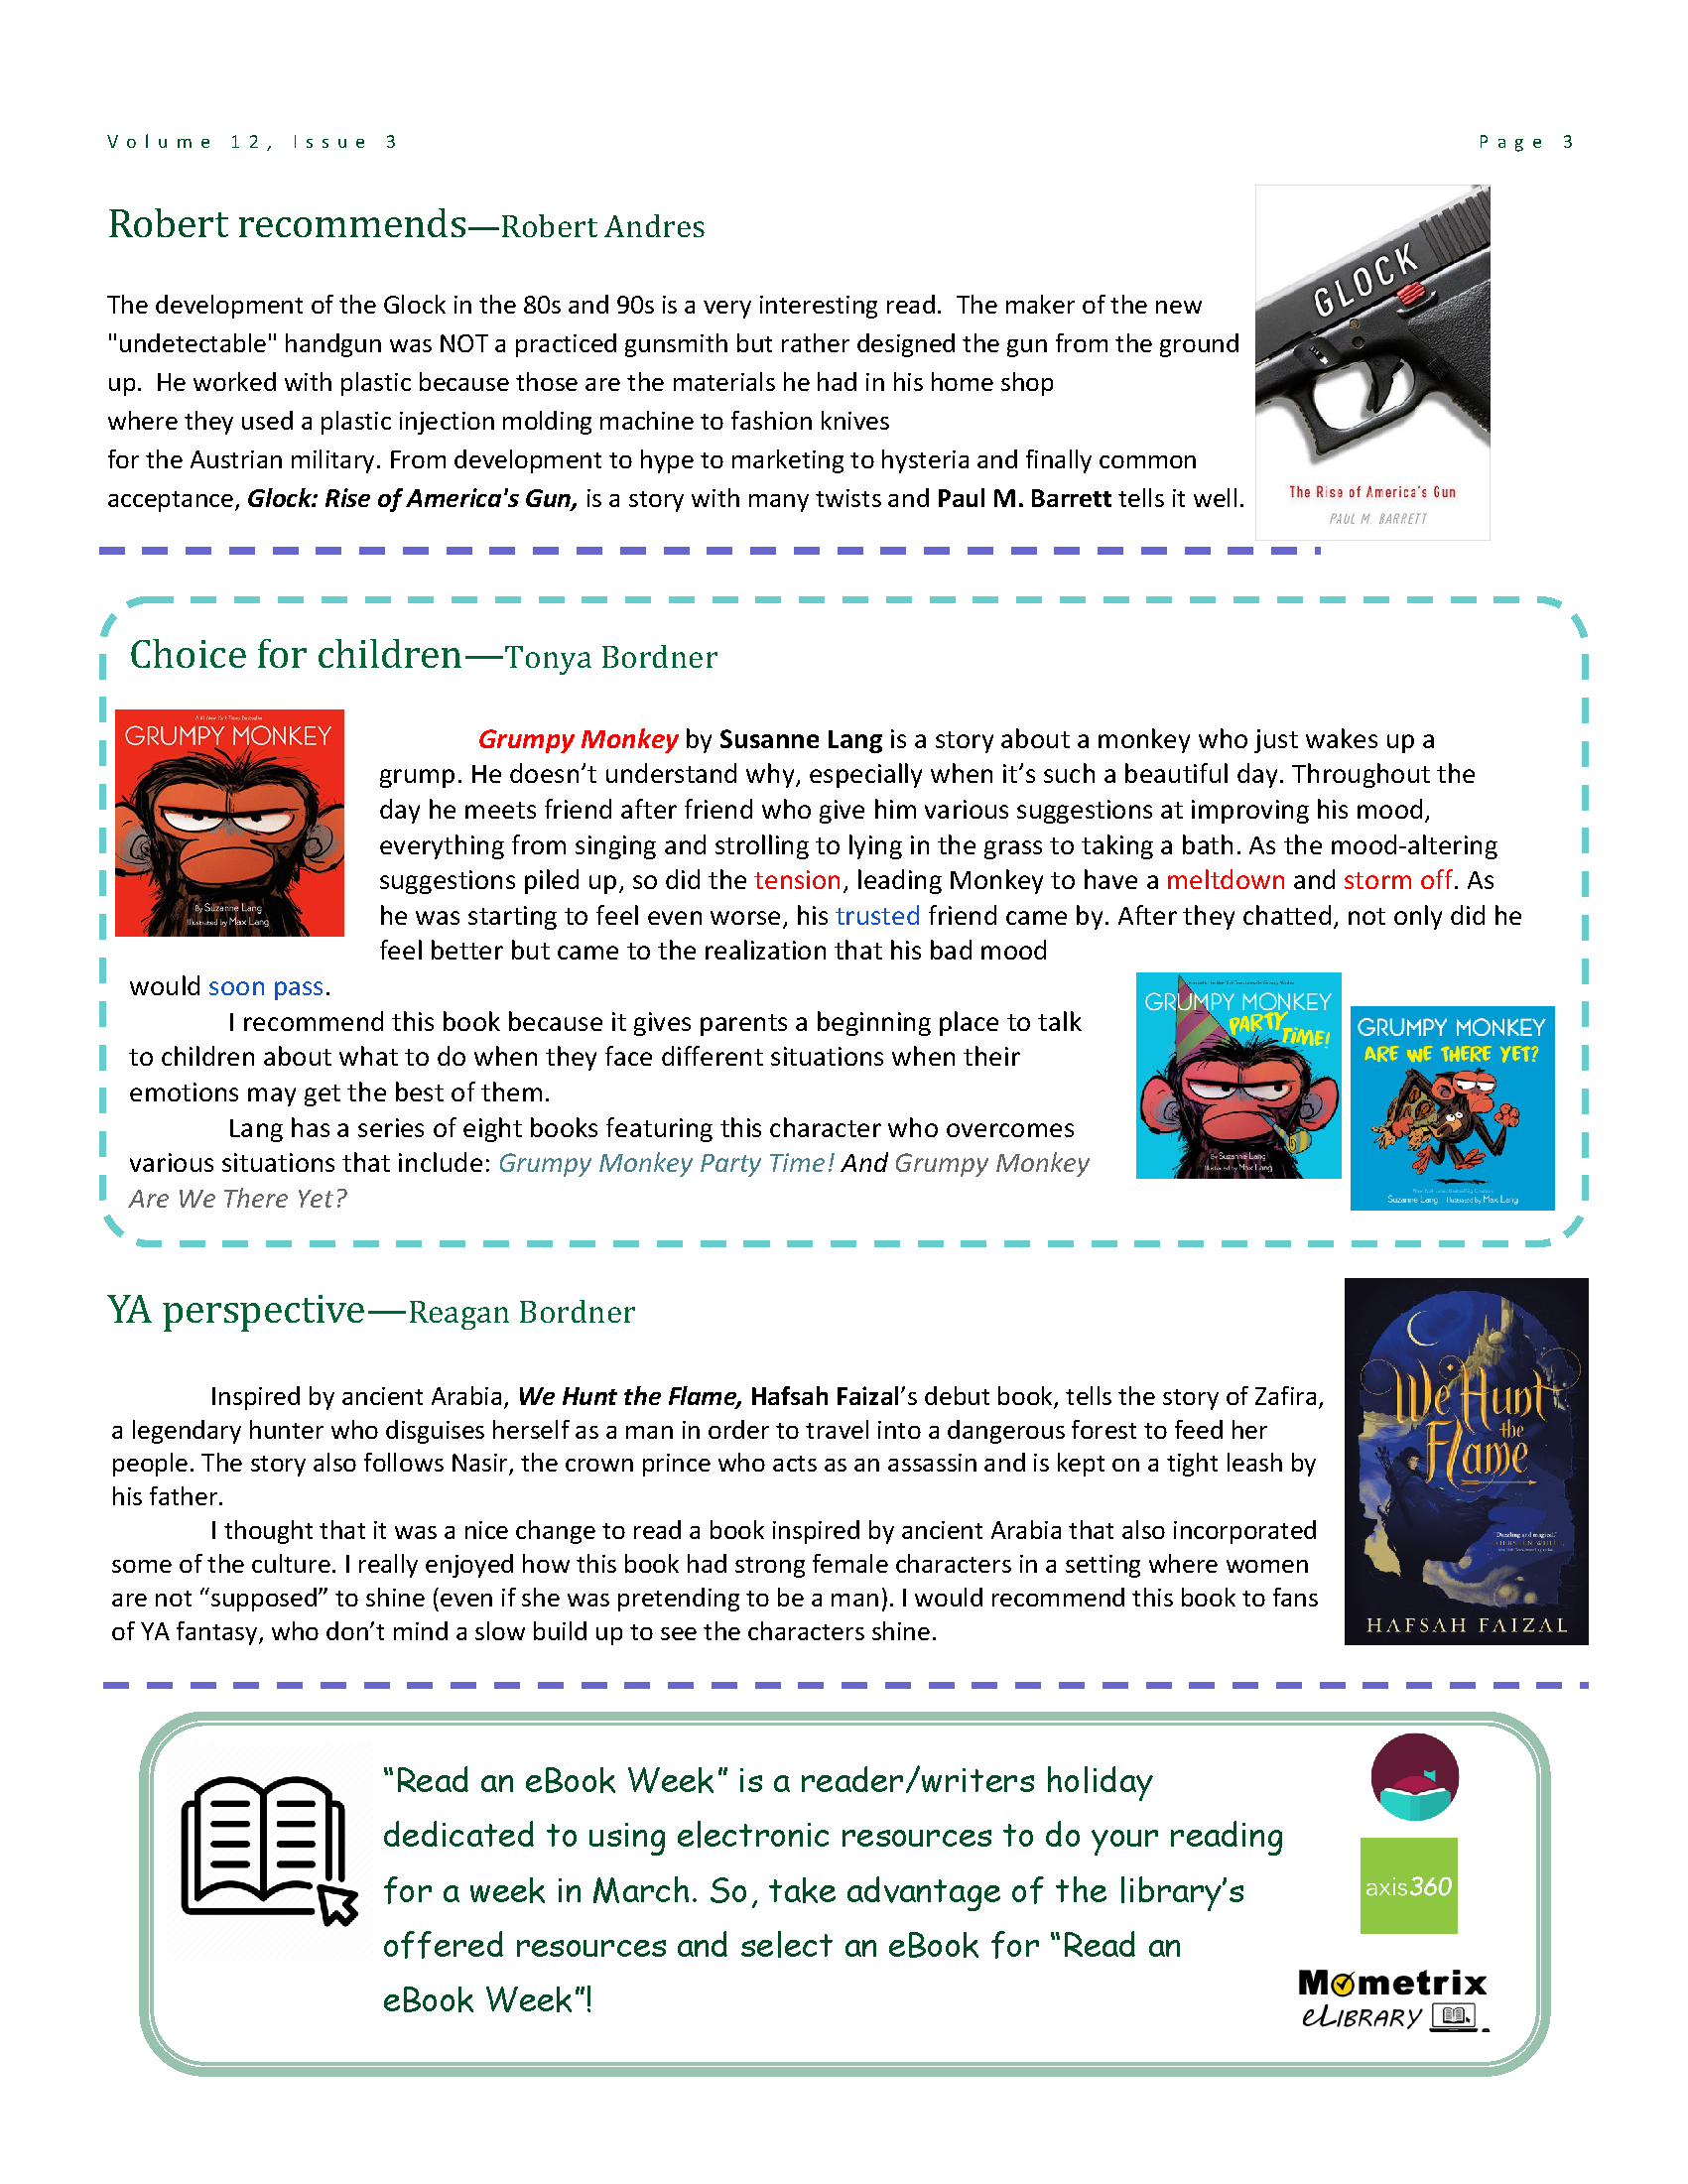 Image of page 3 of the newsletter, available in link as a PDF